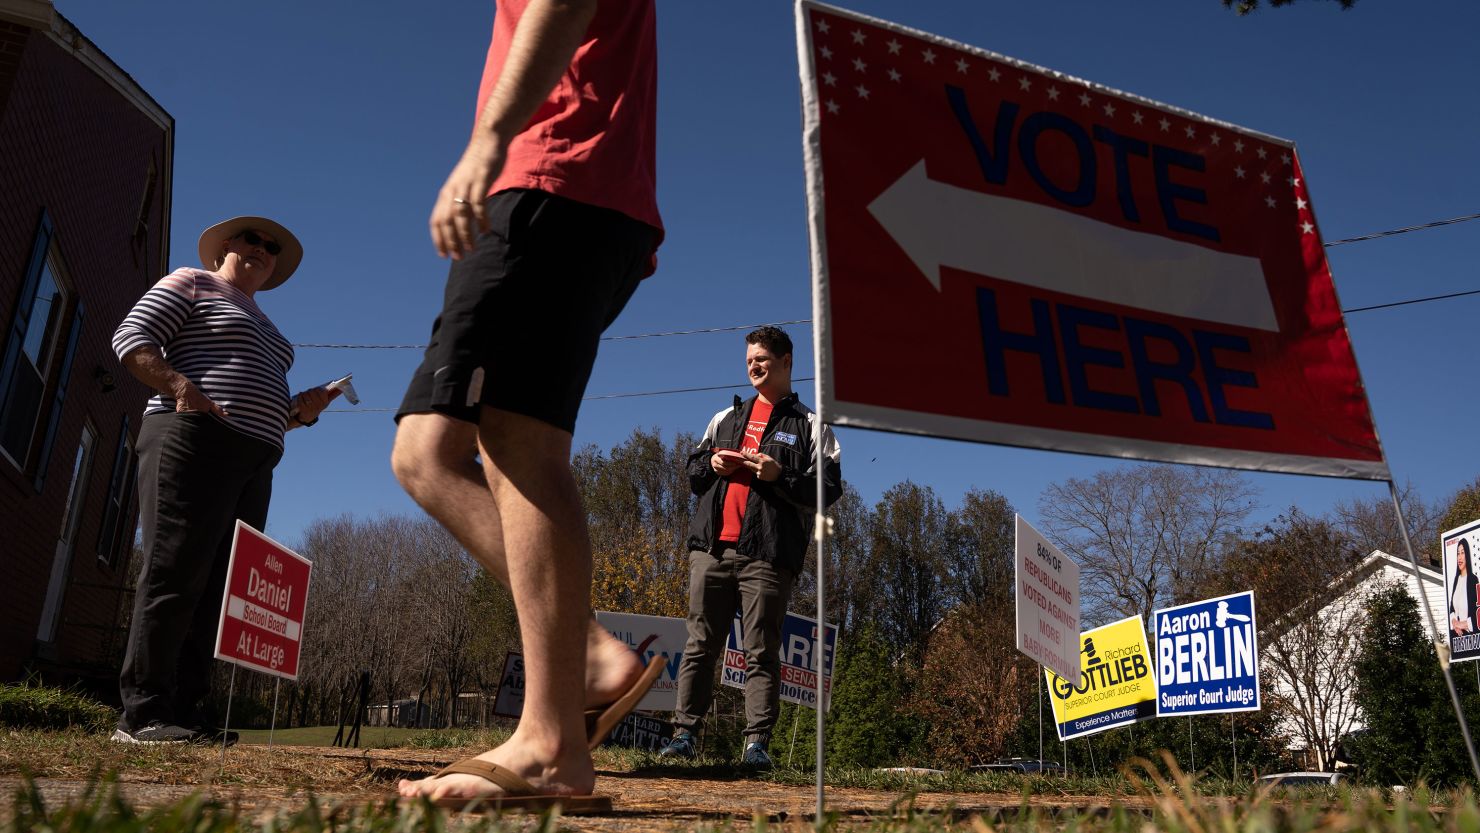 A voter walks past people handing out election literature on November 8, 2022 in Clemmons, North Carolina. 